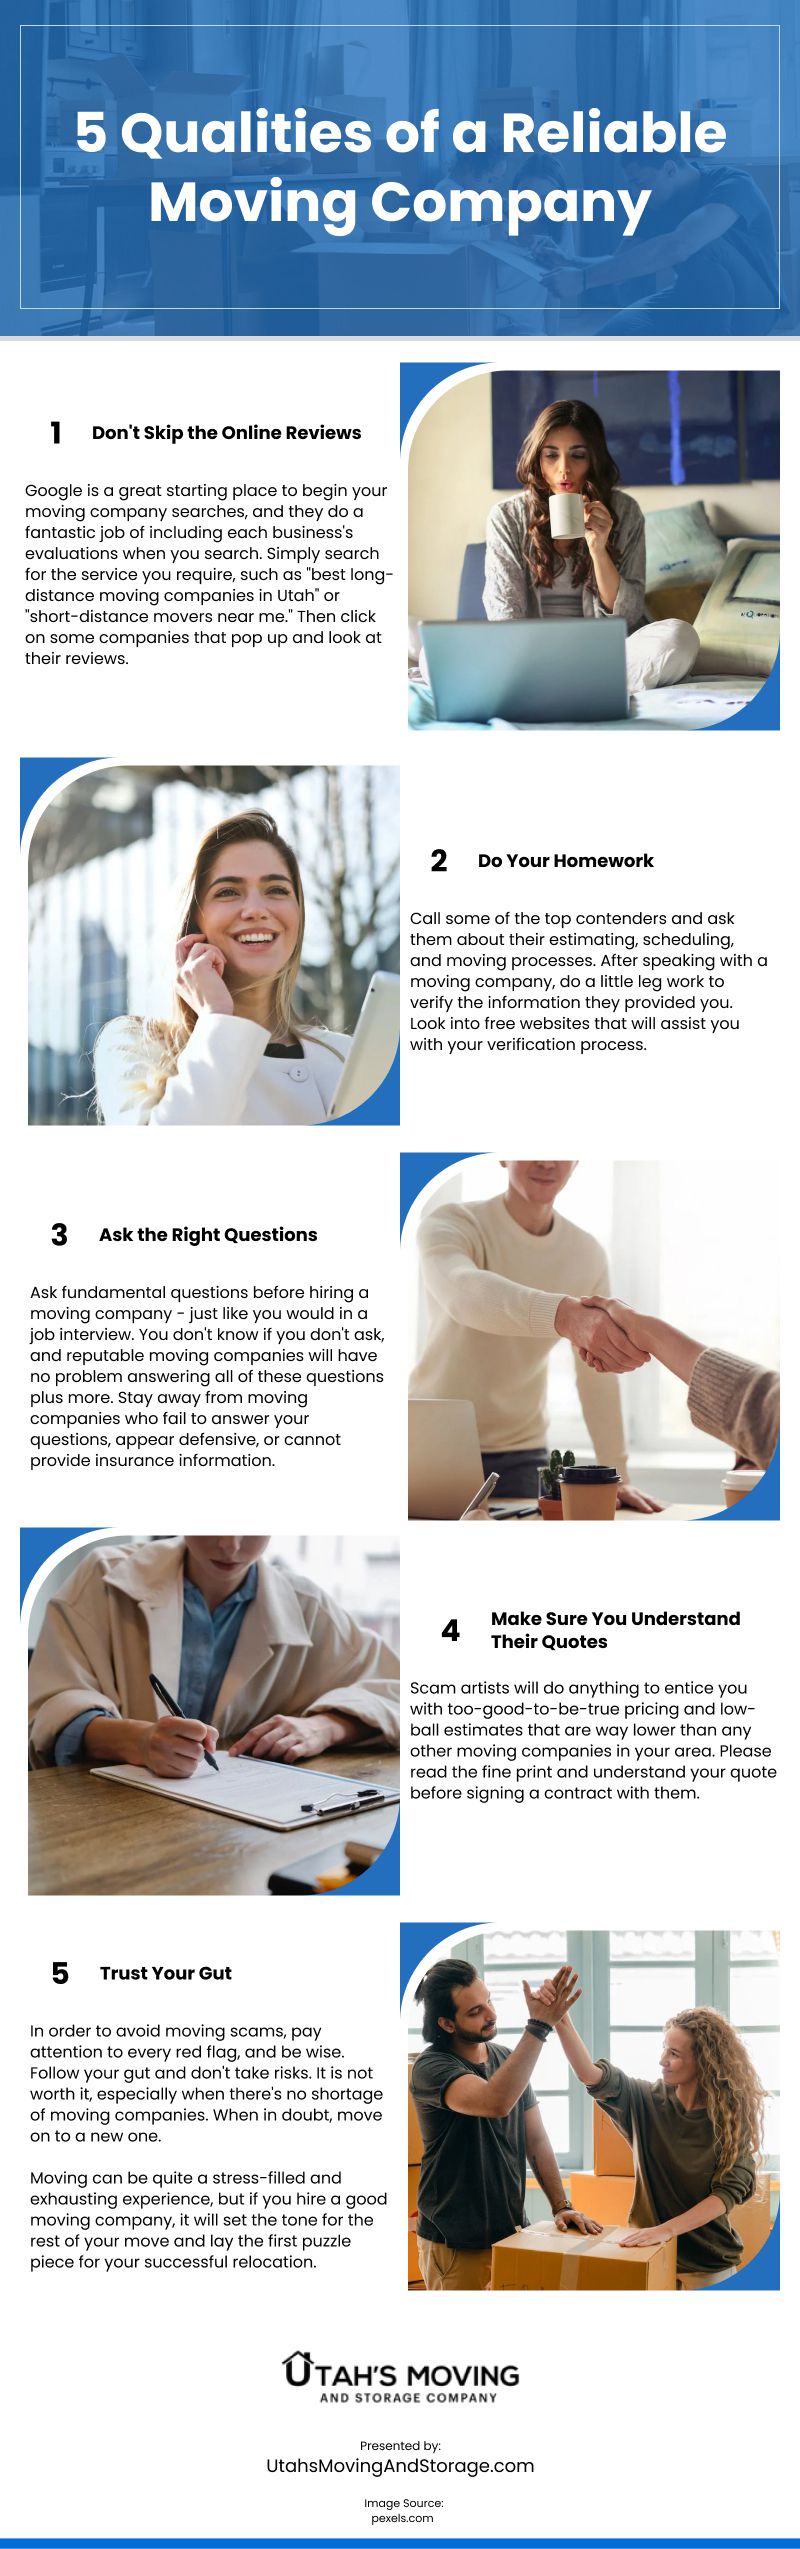 5 Qualities of a Reliable Moving Company Infographic